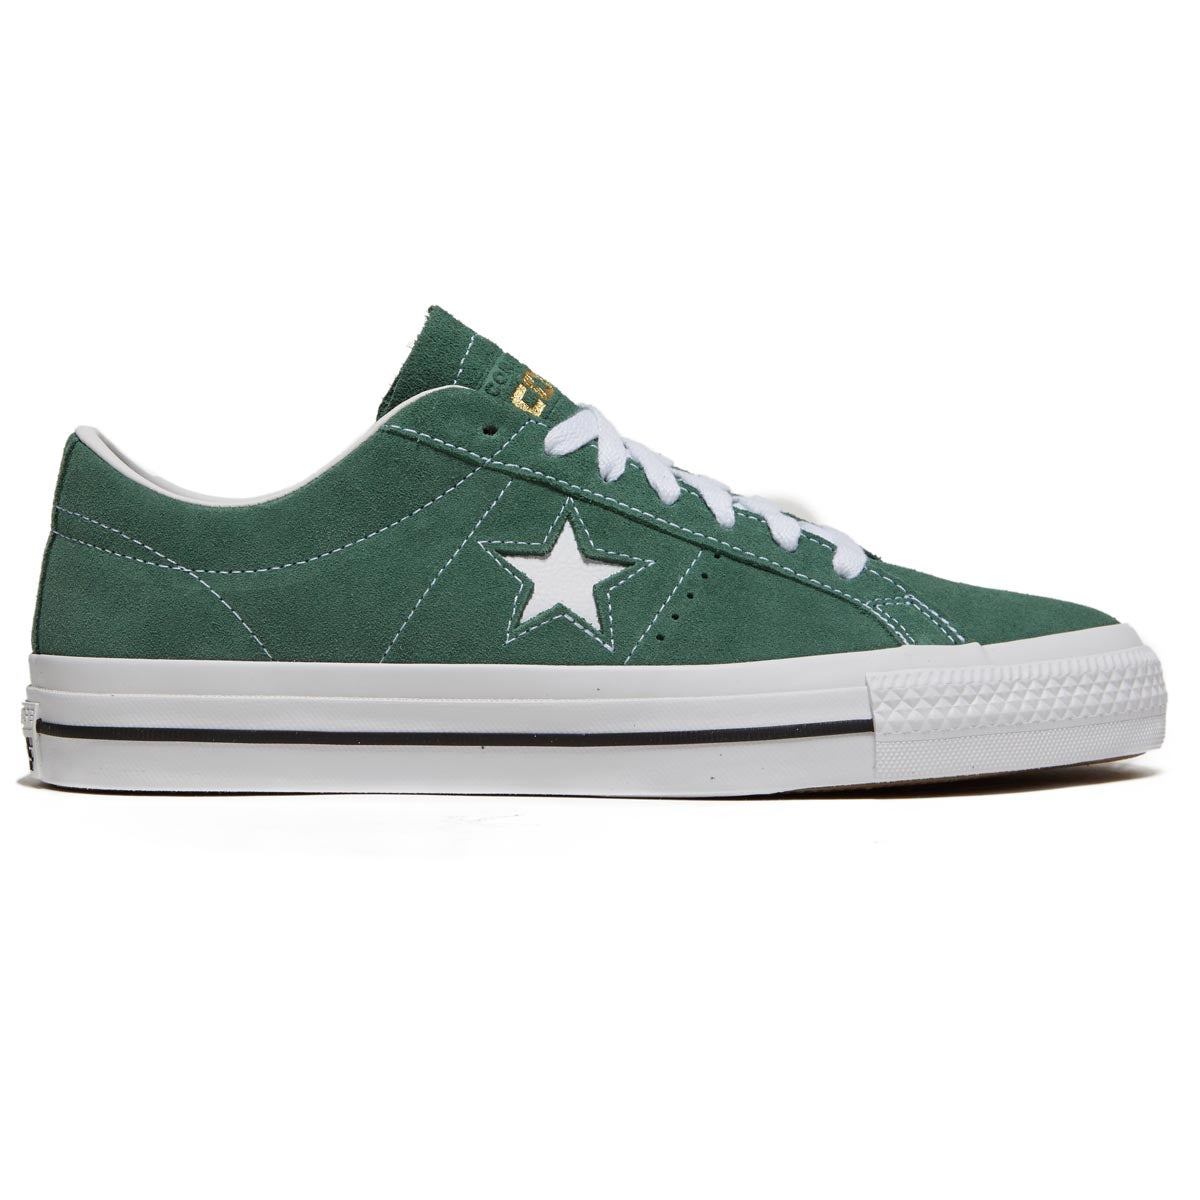 Converse One Star Pro Shoes - Admiral Elm/White/Black image 1